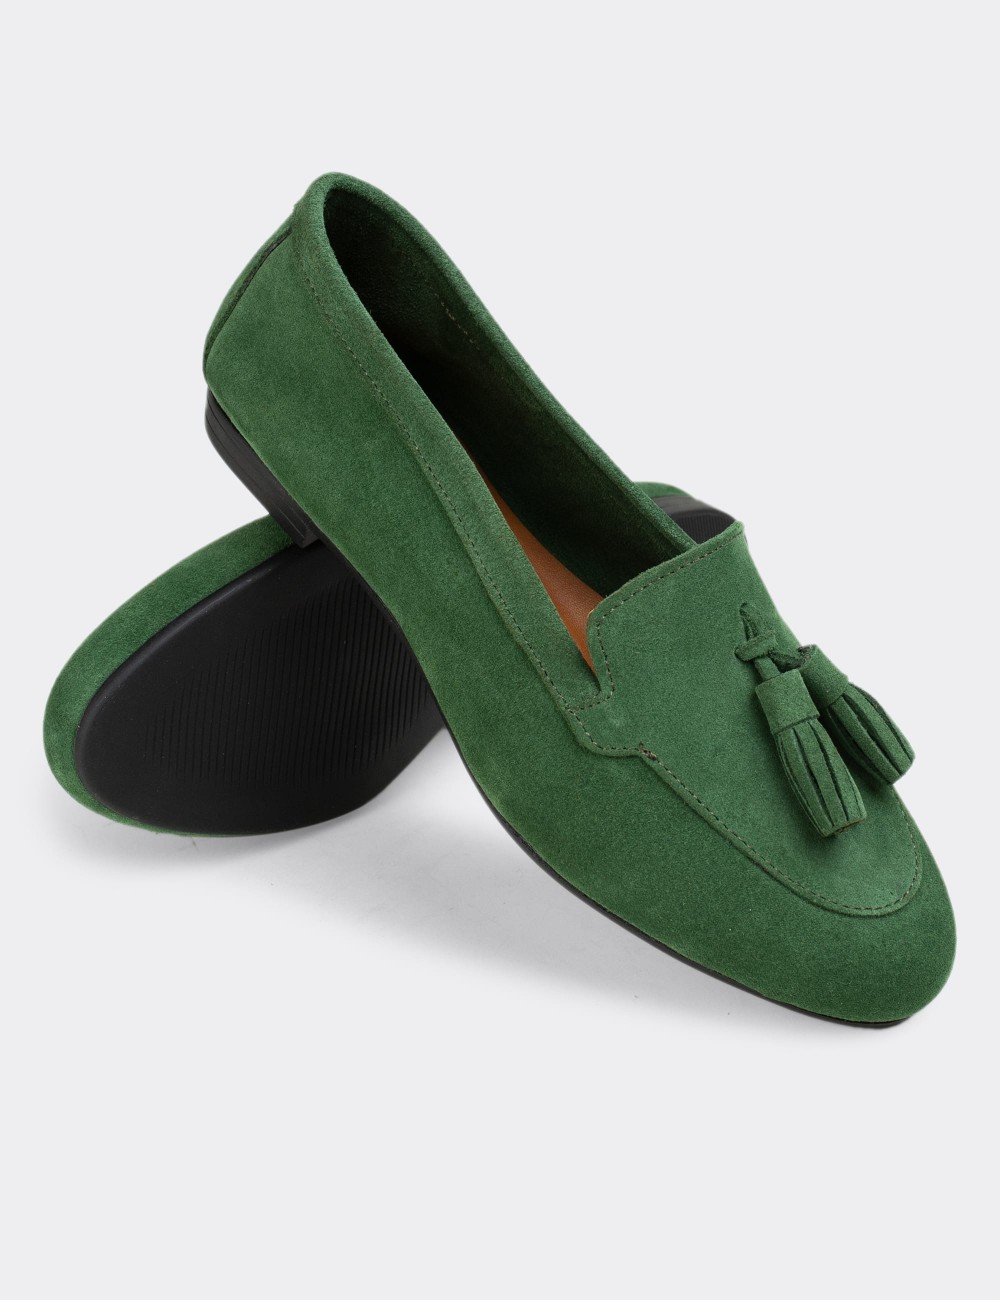 Green Suede Leather Loafers - E3209ZYSLC05